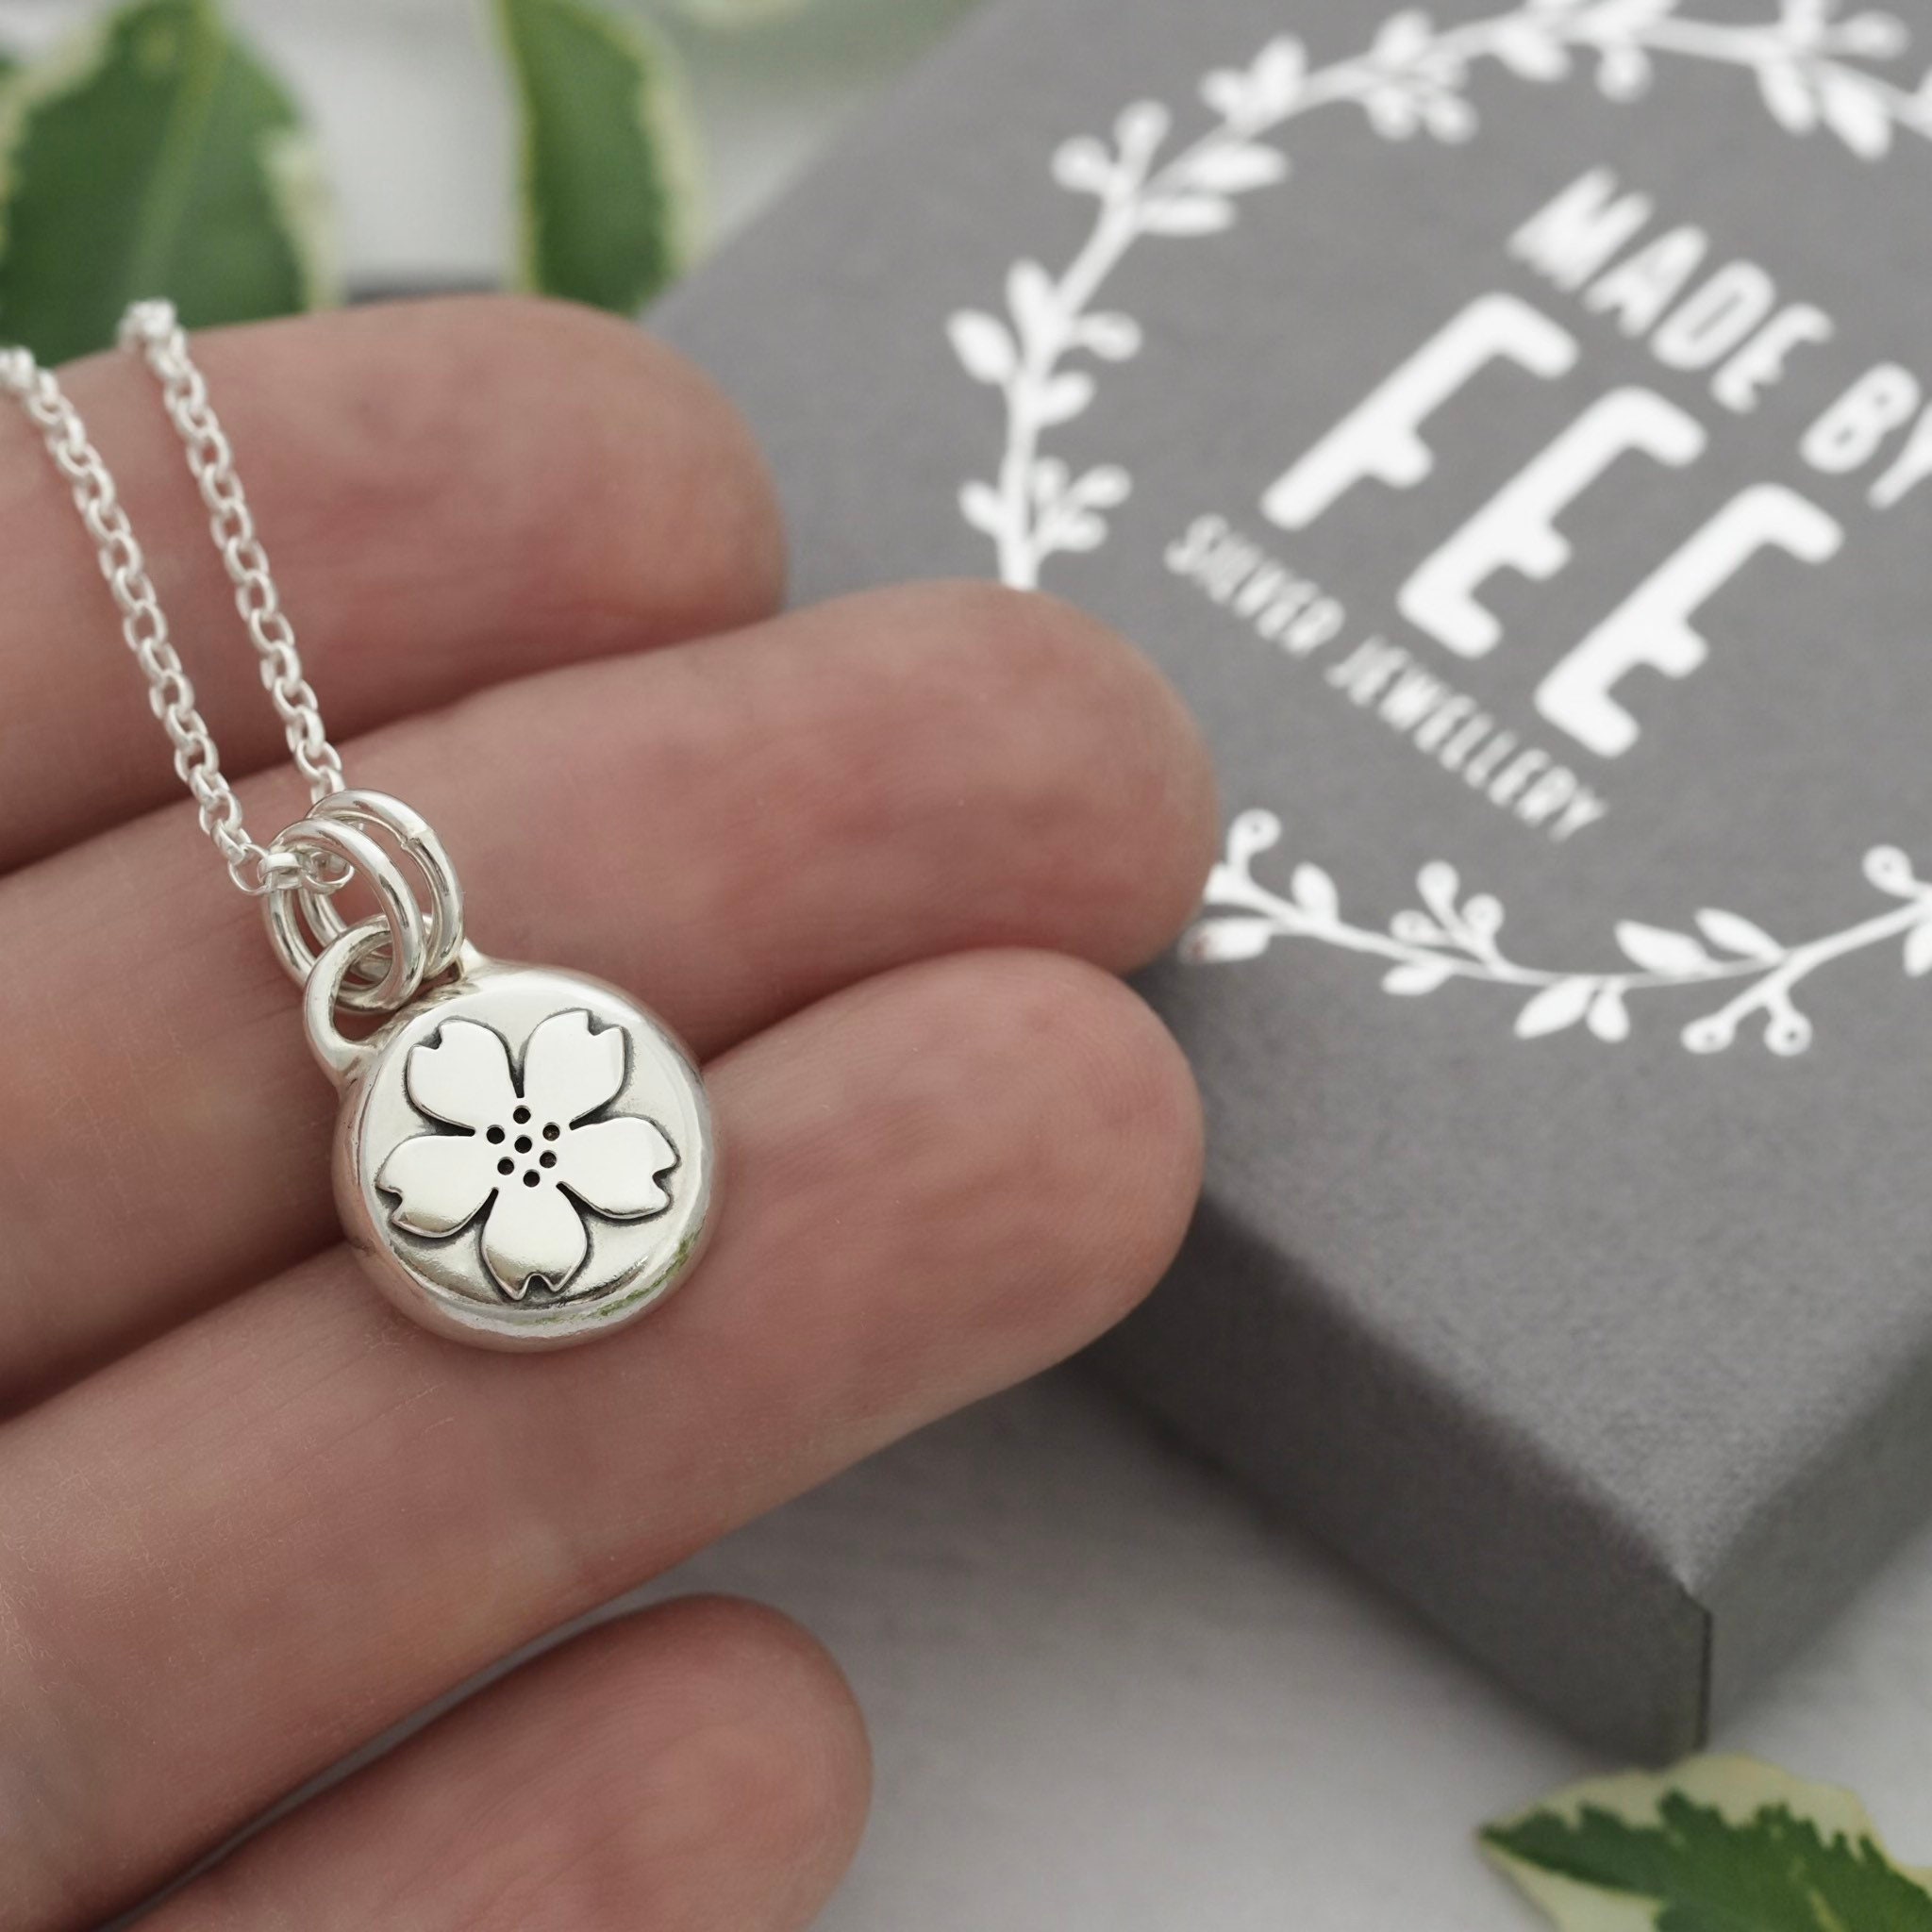 Dainty Sterling Silver Cherry Blossom Pebble Pendant Necklace